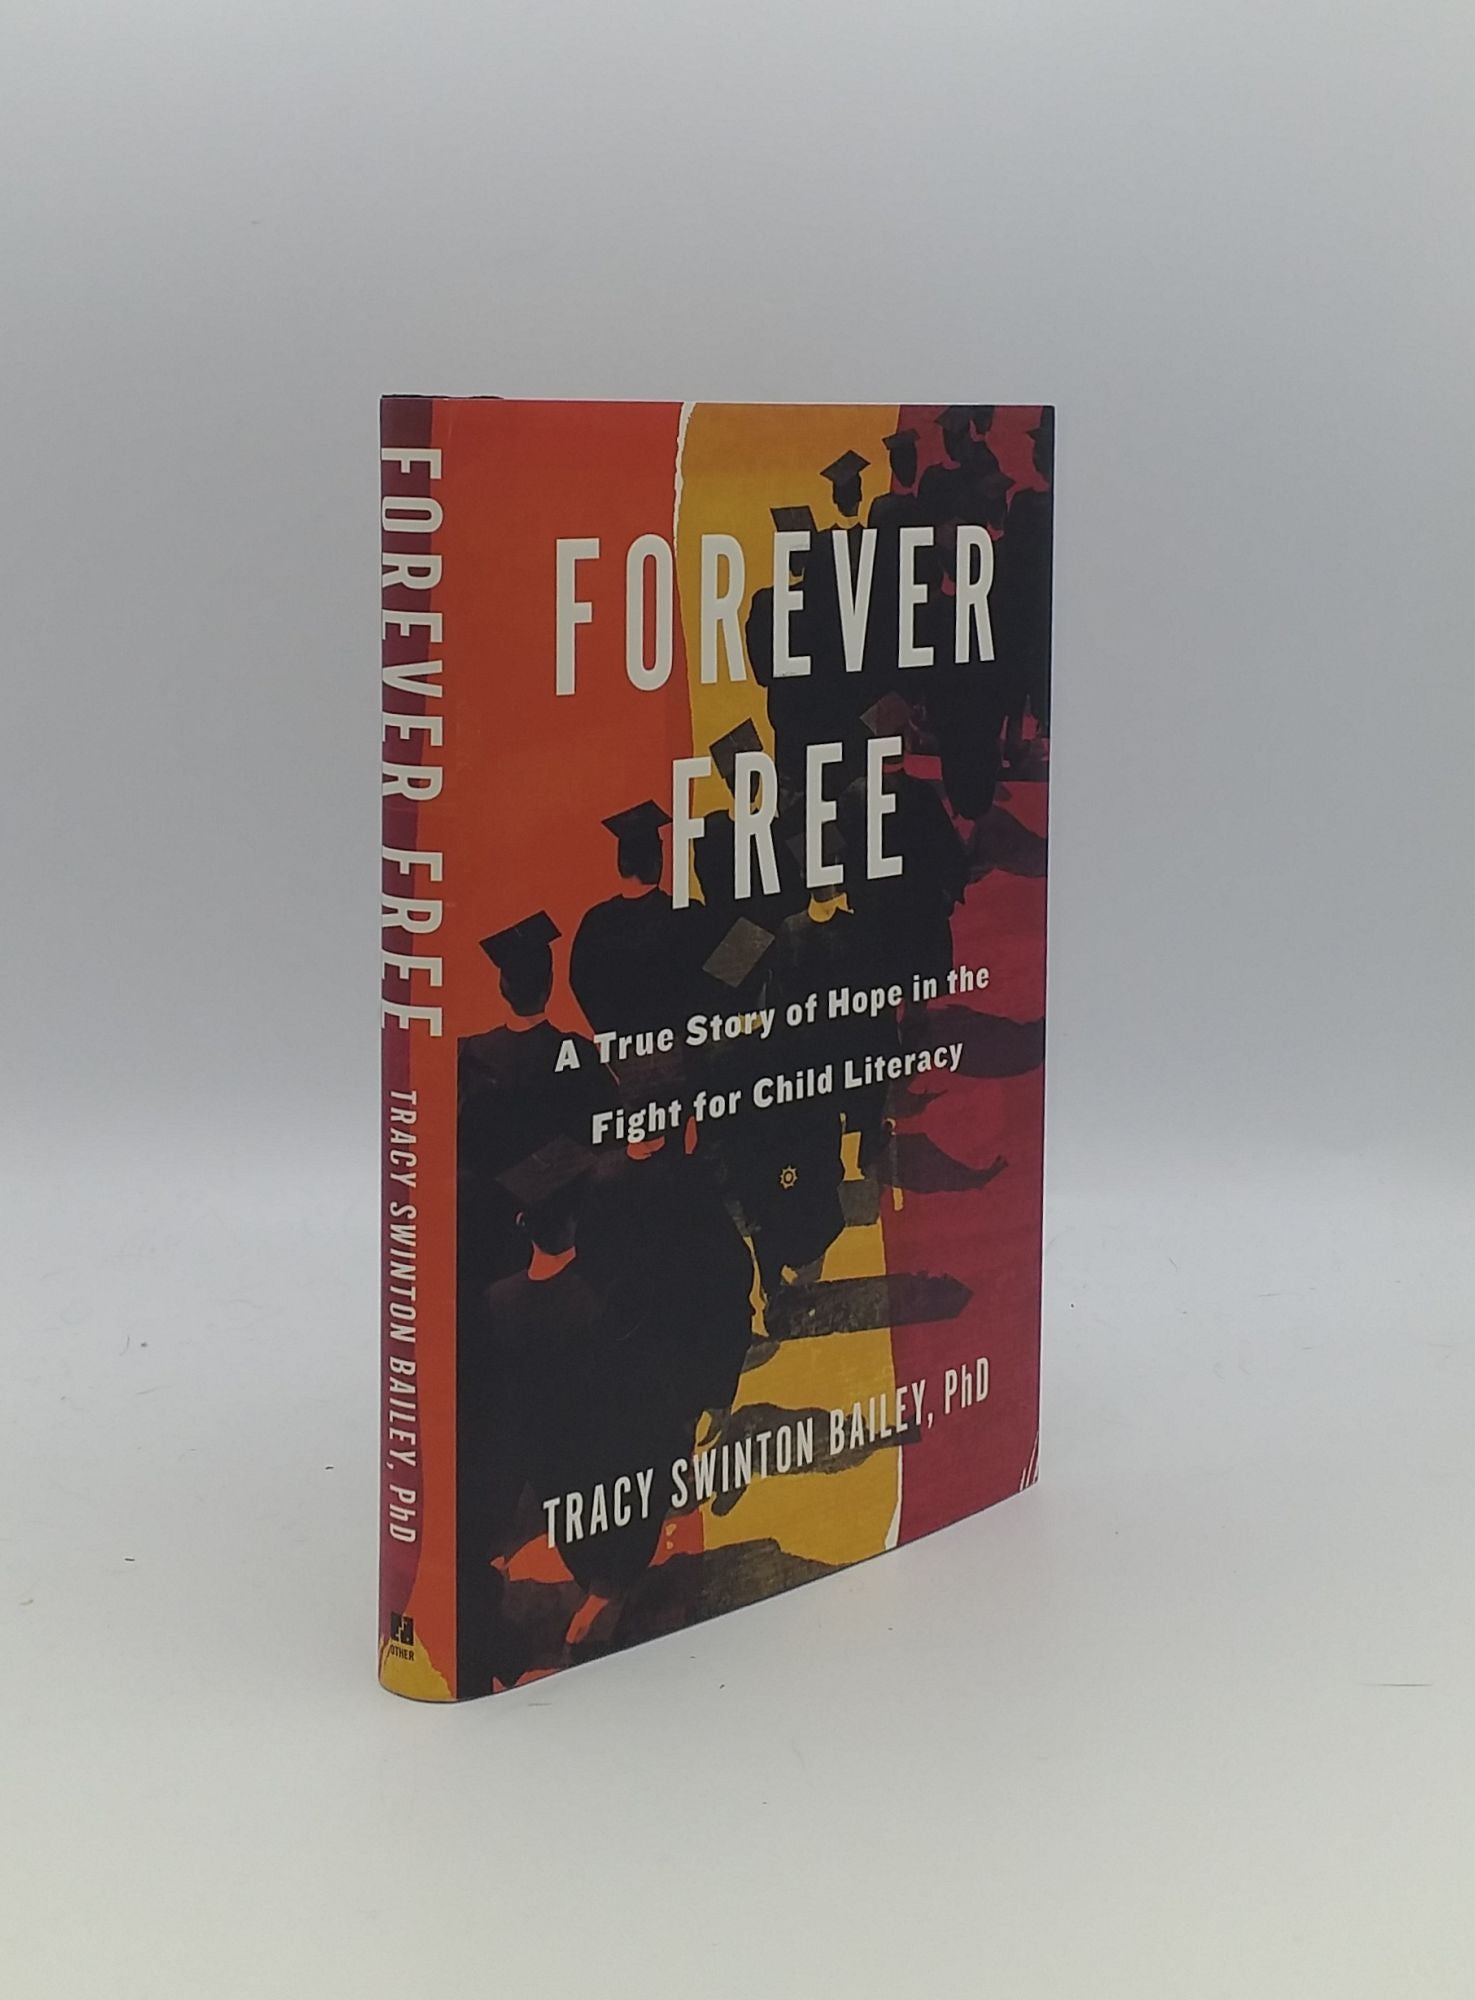 BAILEY Tracy Swinton - Forever Free a True Story of Hope in the Fight for Child Literacy